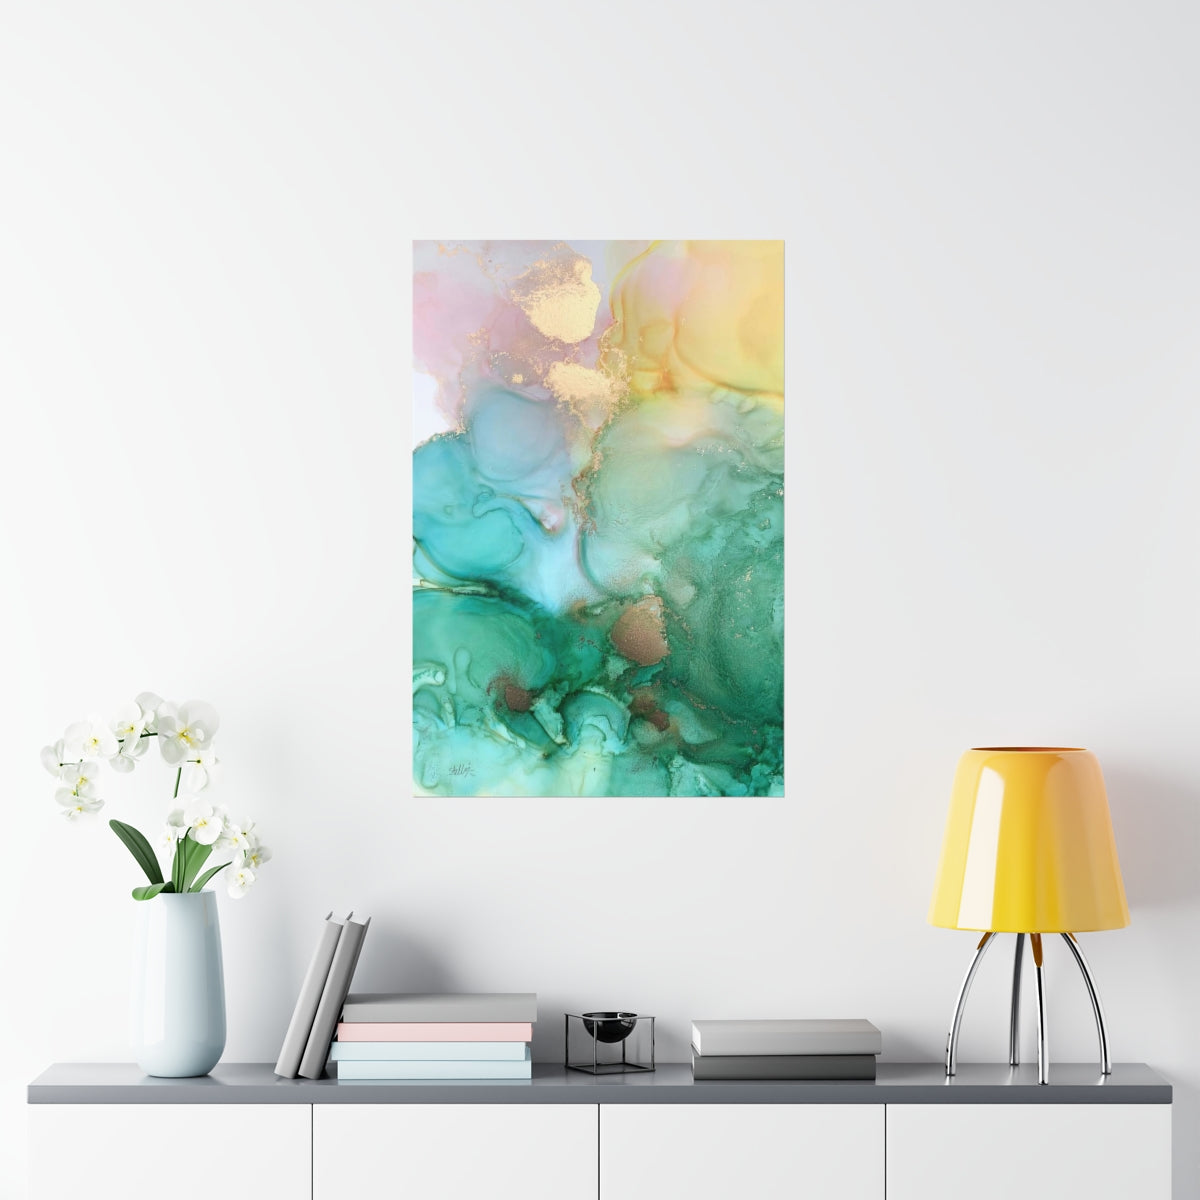 "Ethereal Bloom" - Spring Magic Collection - Matte Vertical Poster